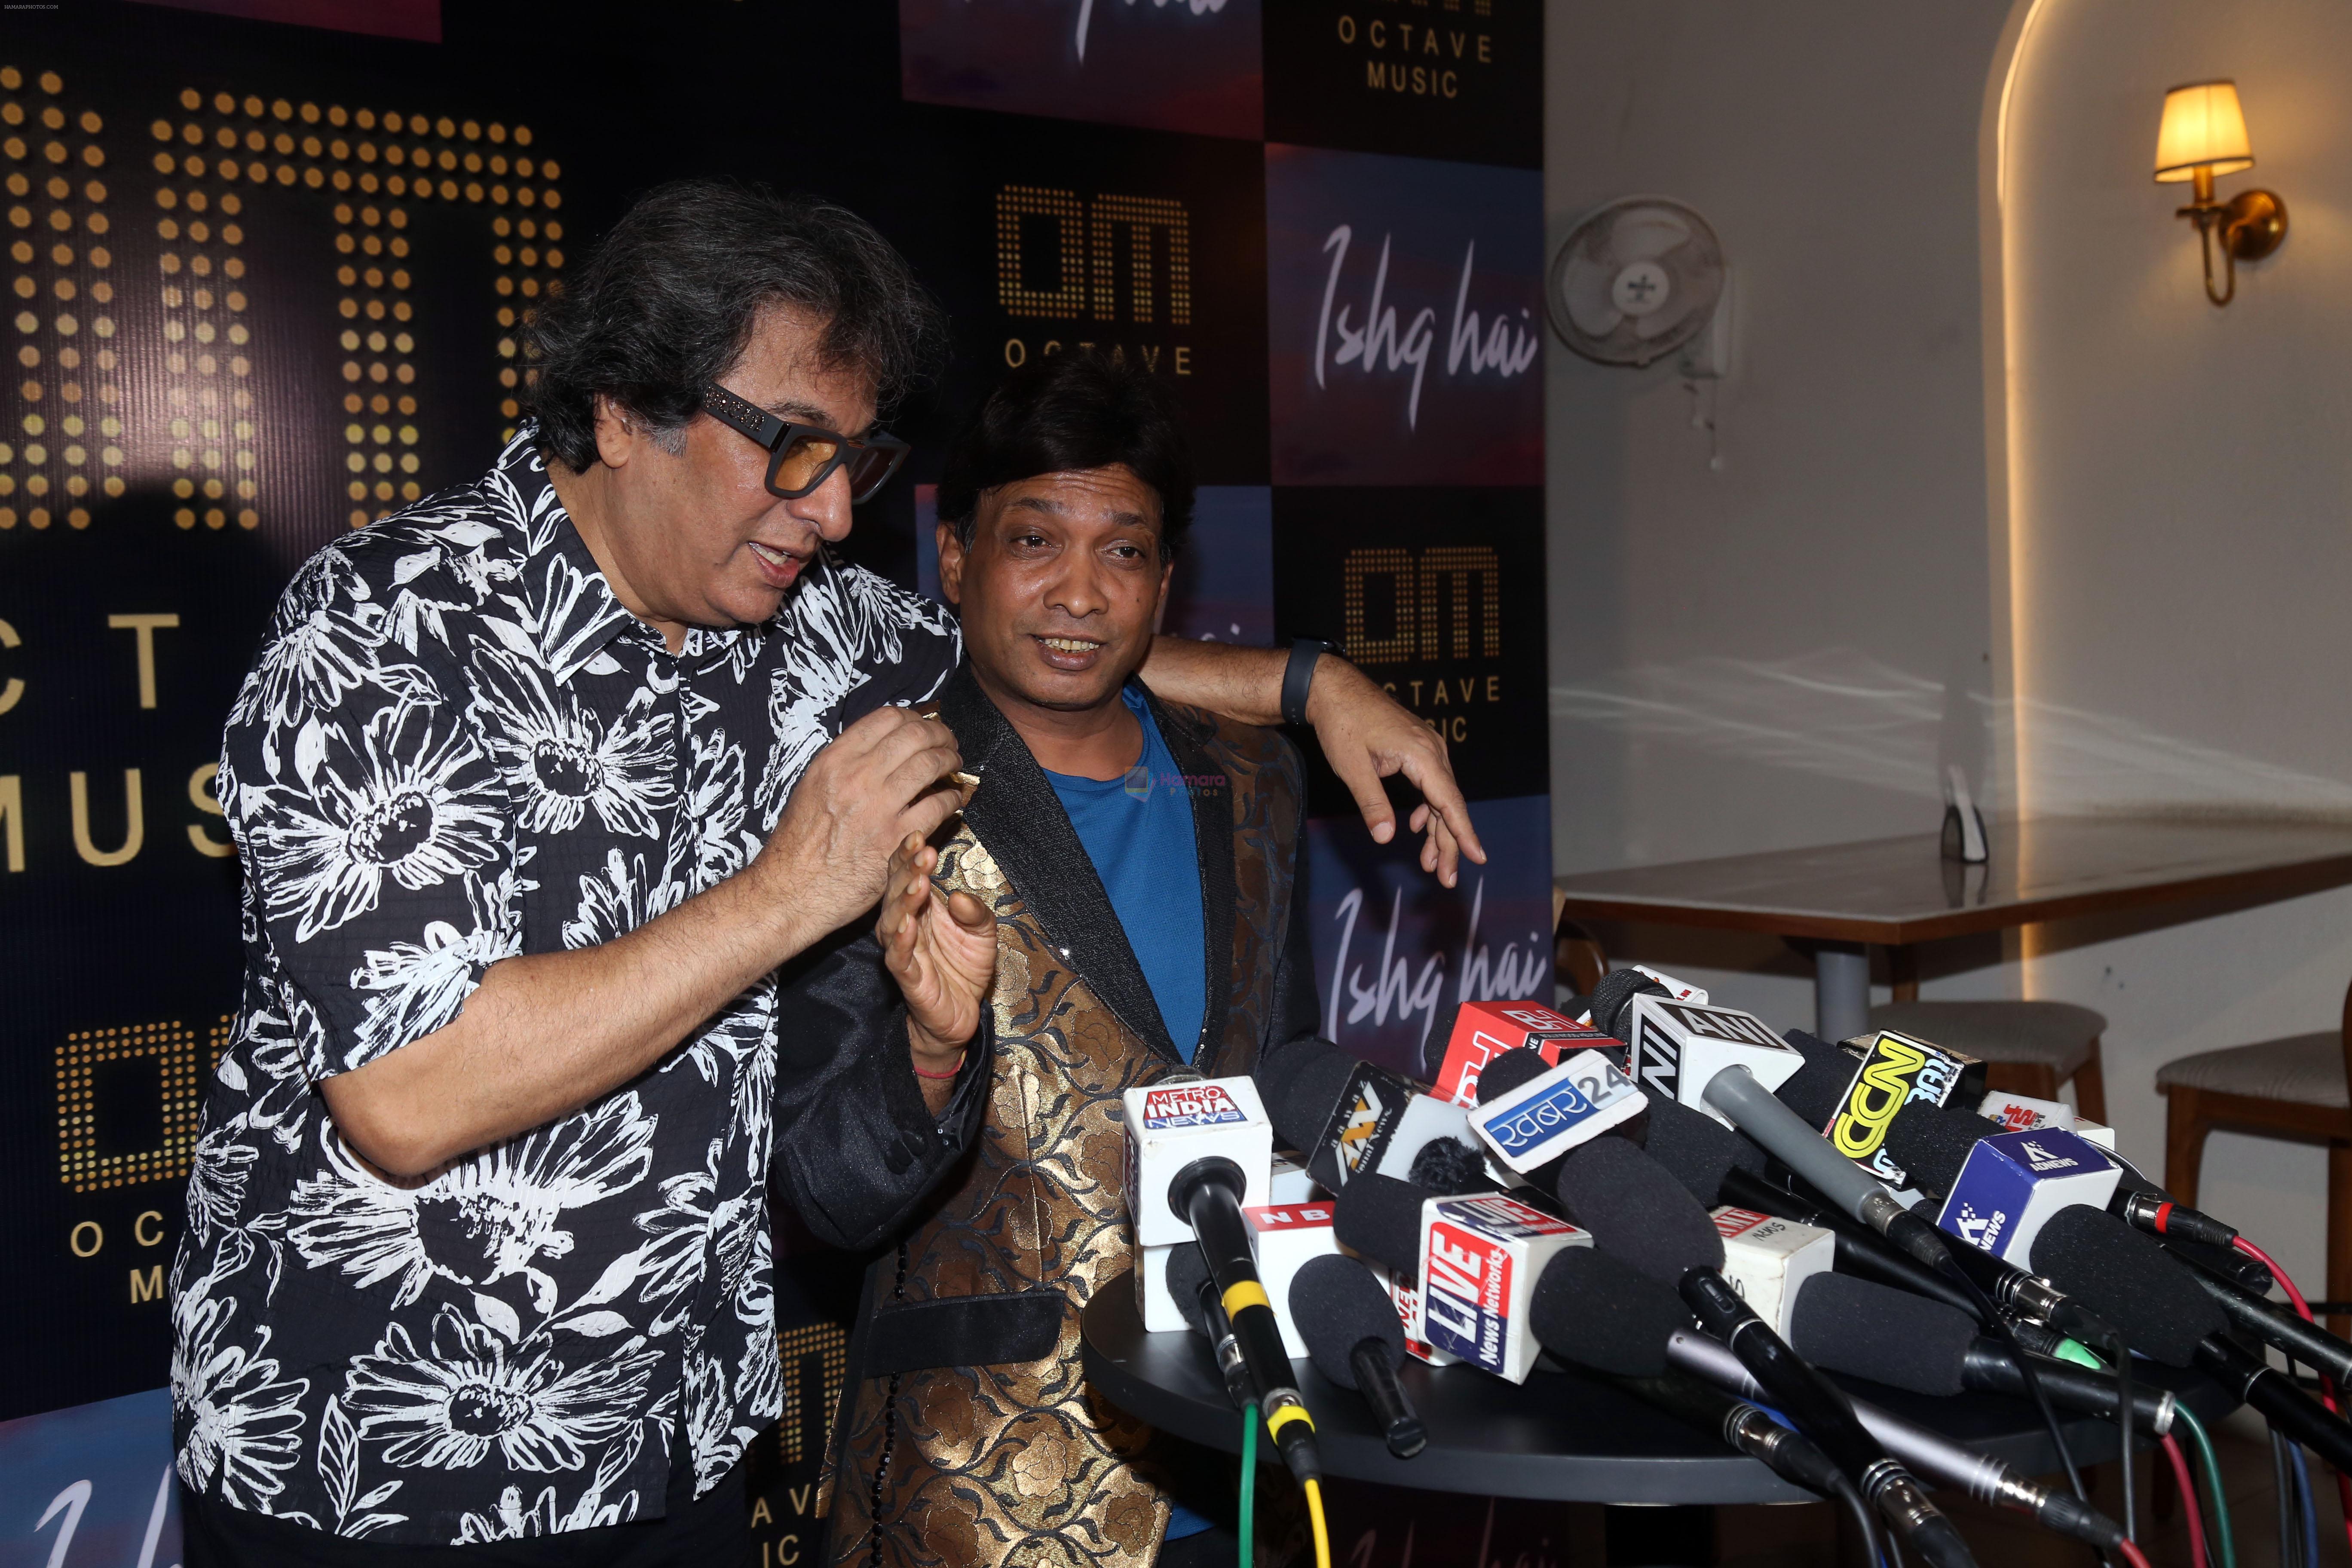 Sunil Pal, Talat Aziz at the Launch of Octave Music and Ishq Hai Song on 22nd August 2023